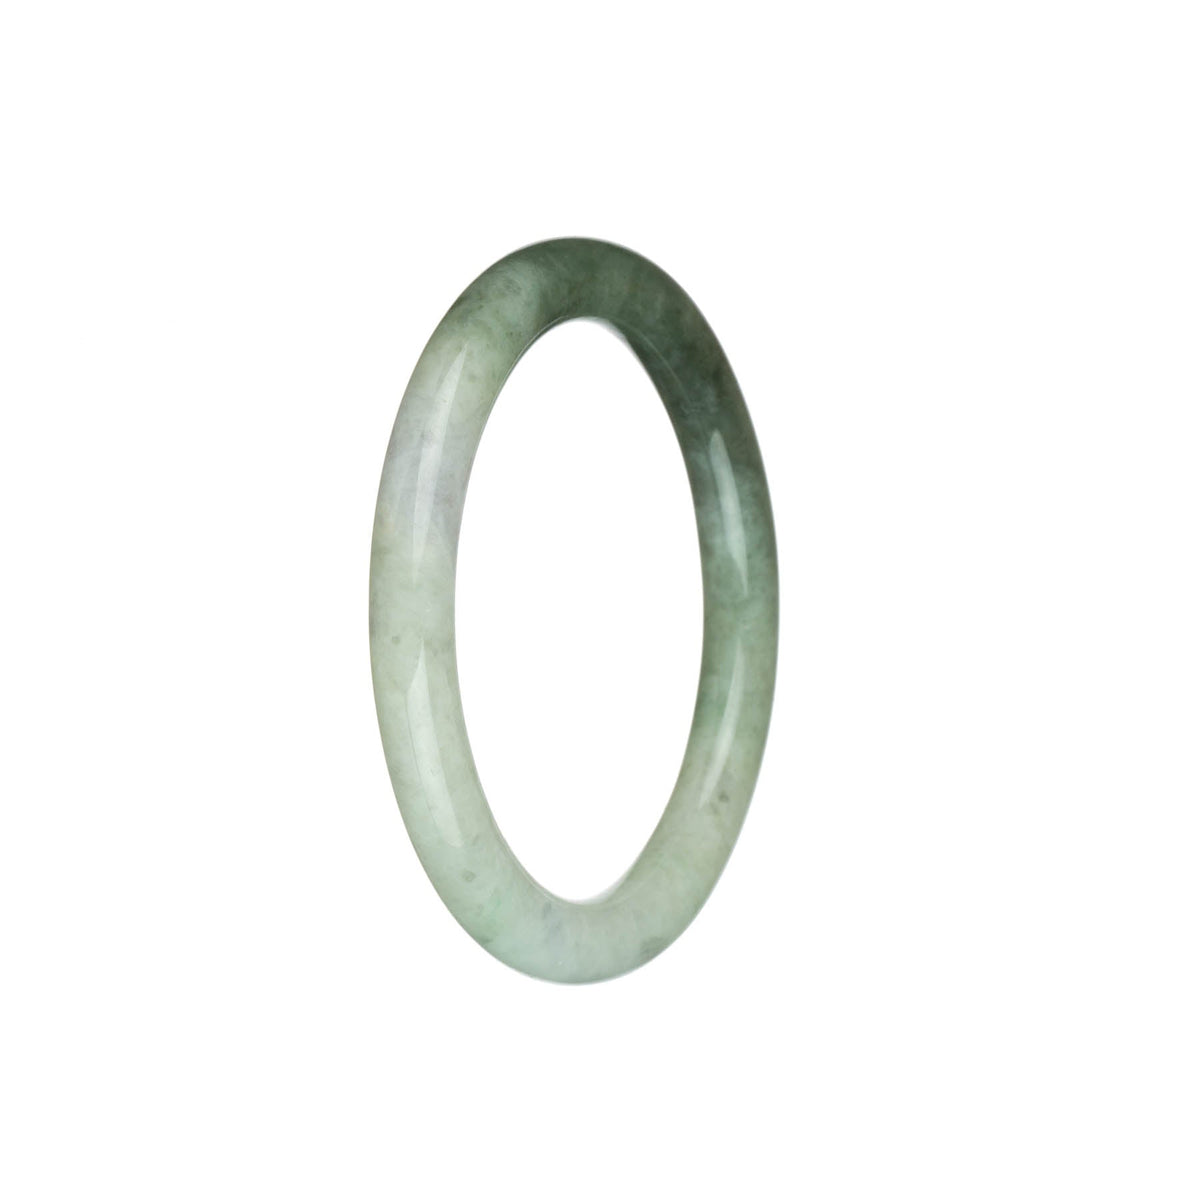 Certified Grade A Green and Pale Green with Brown Patch Traditional Jade Bangle - 55mm Petite Round